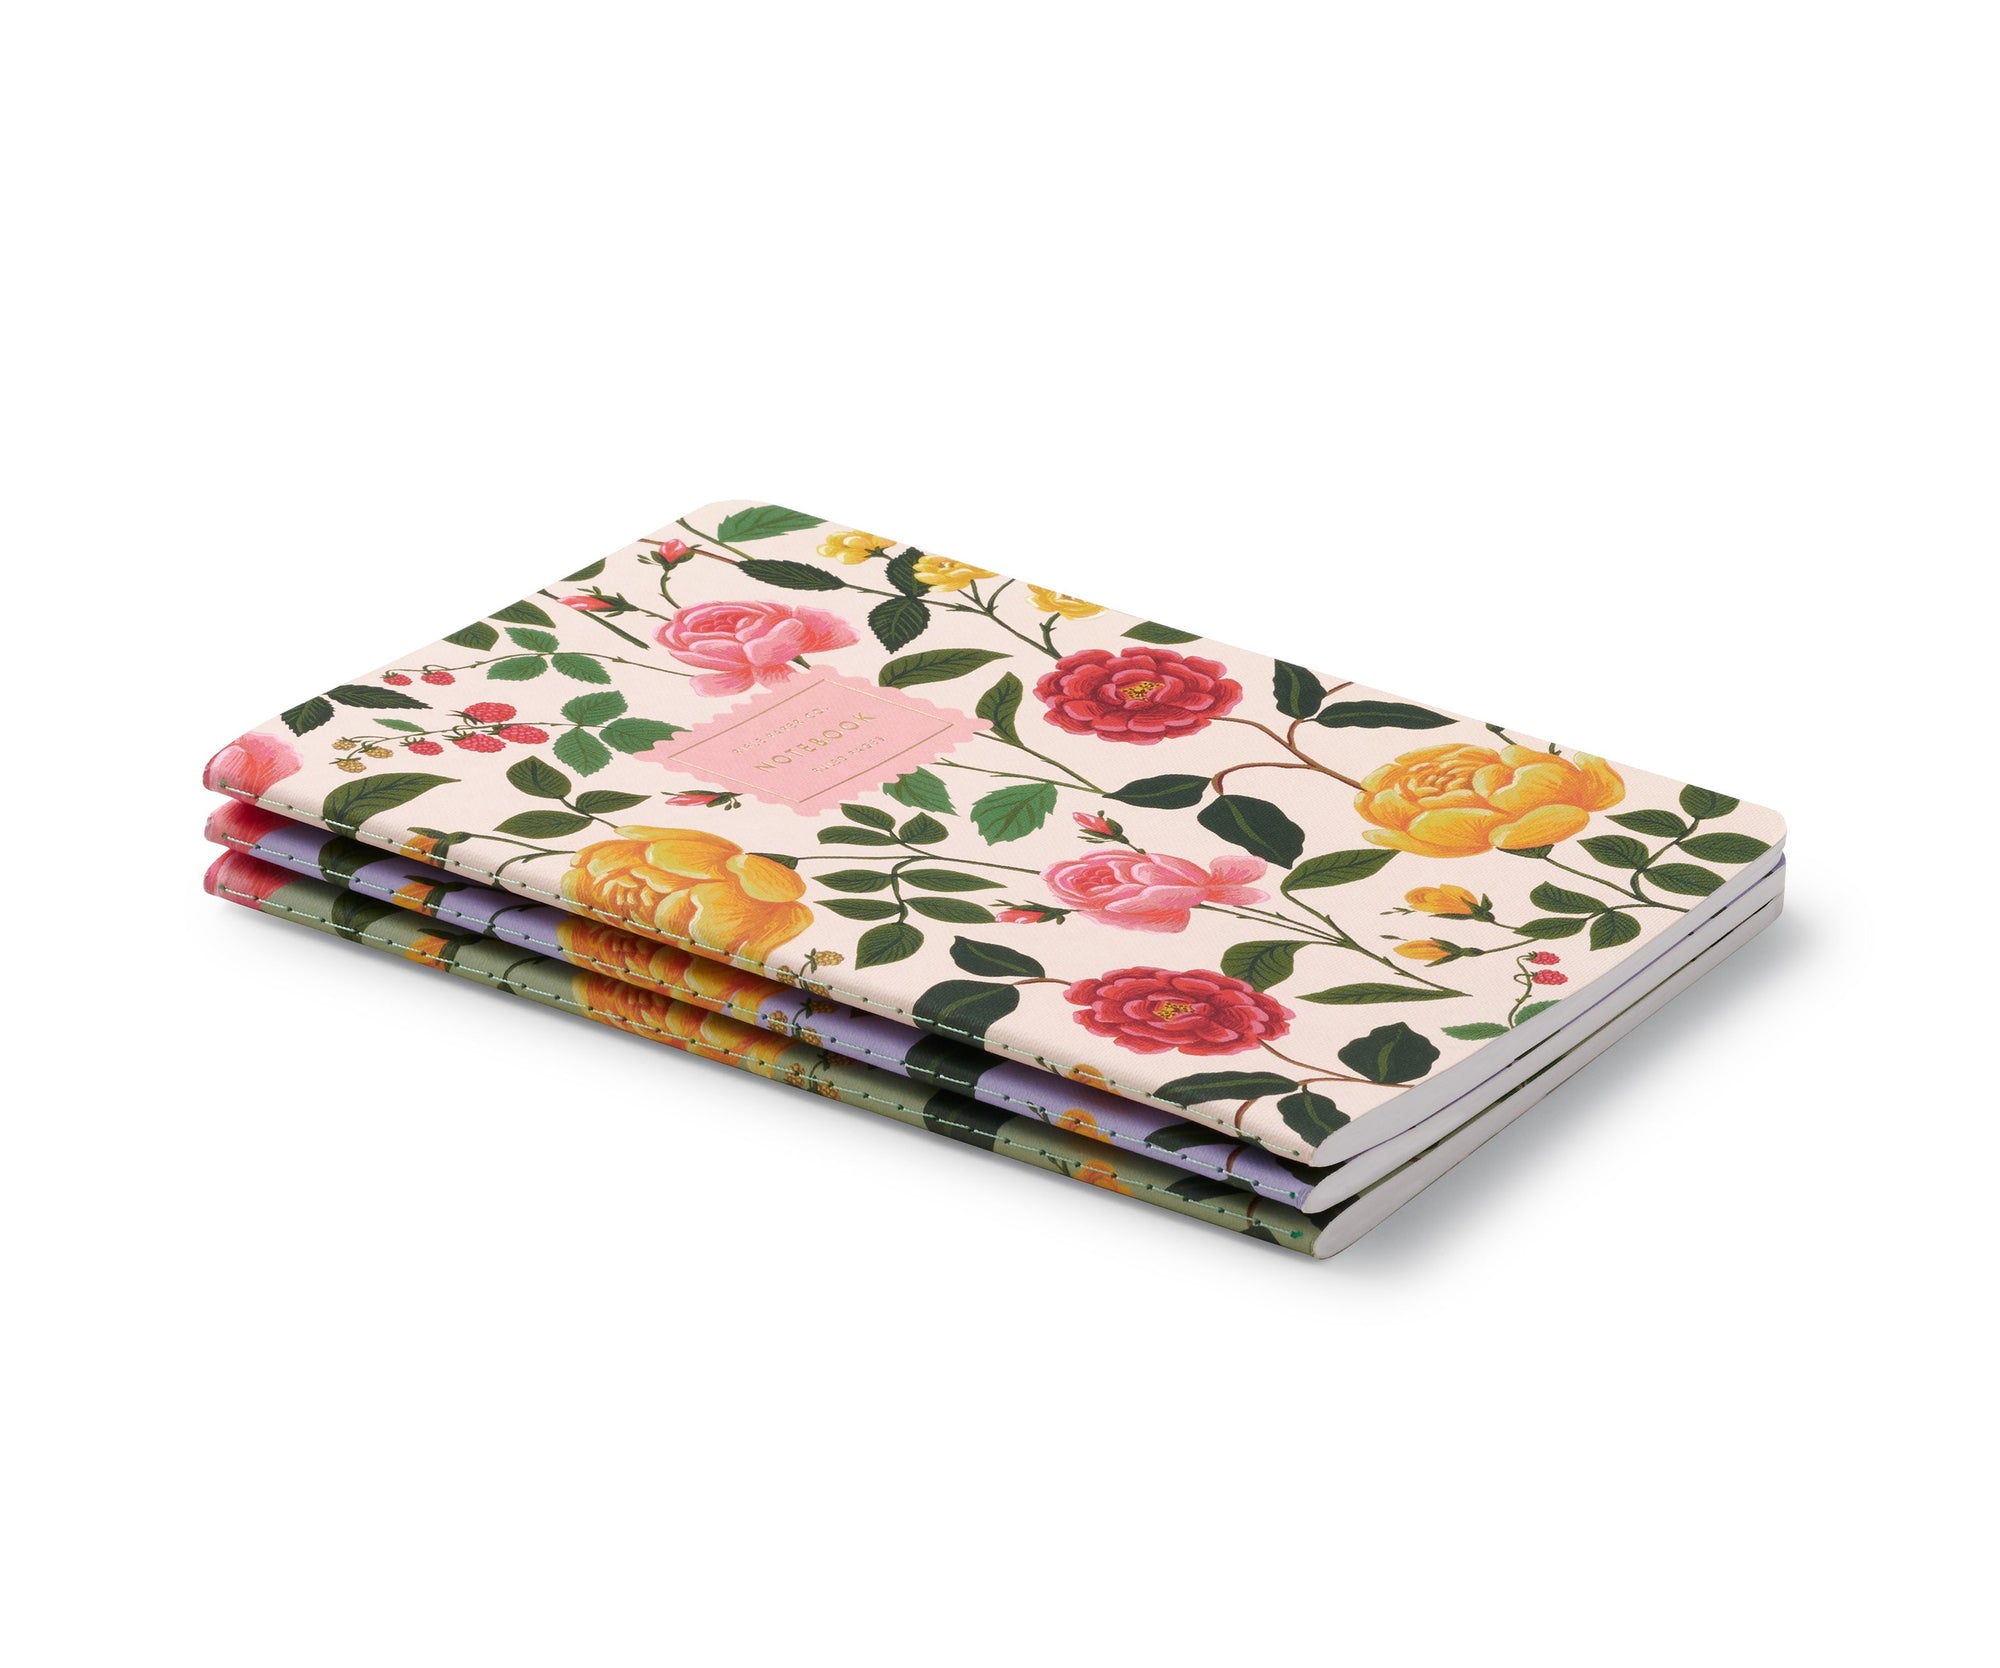 Roses Stitched Notebook Set